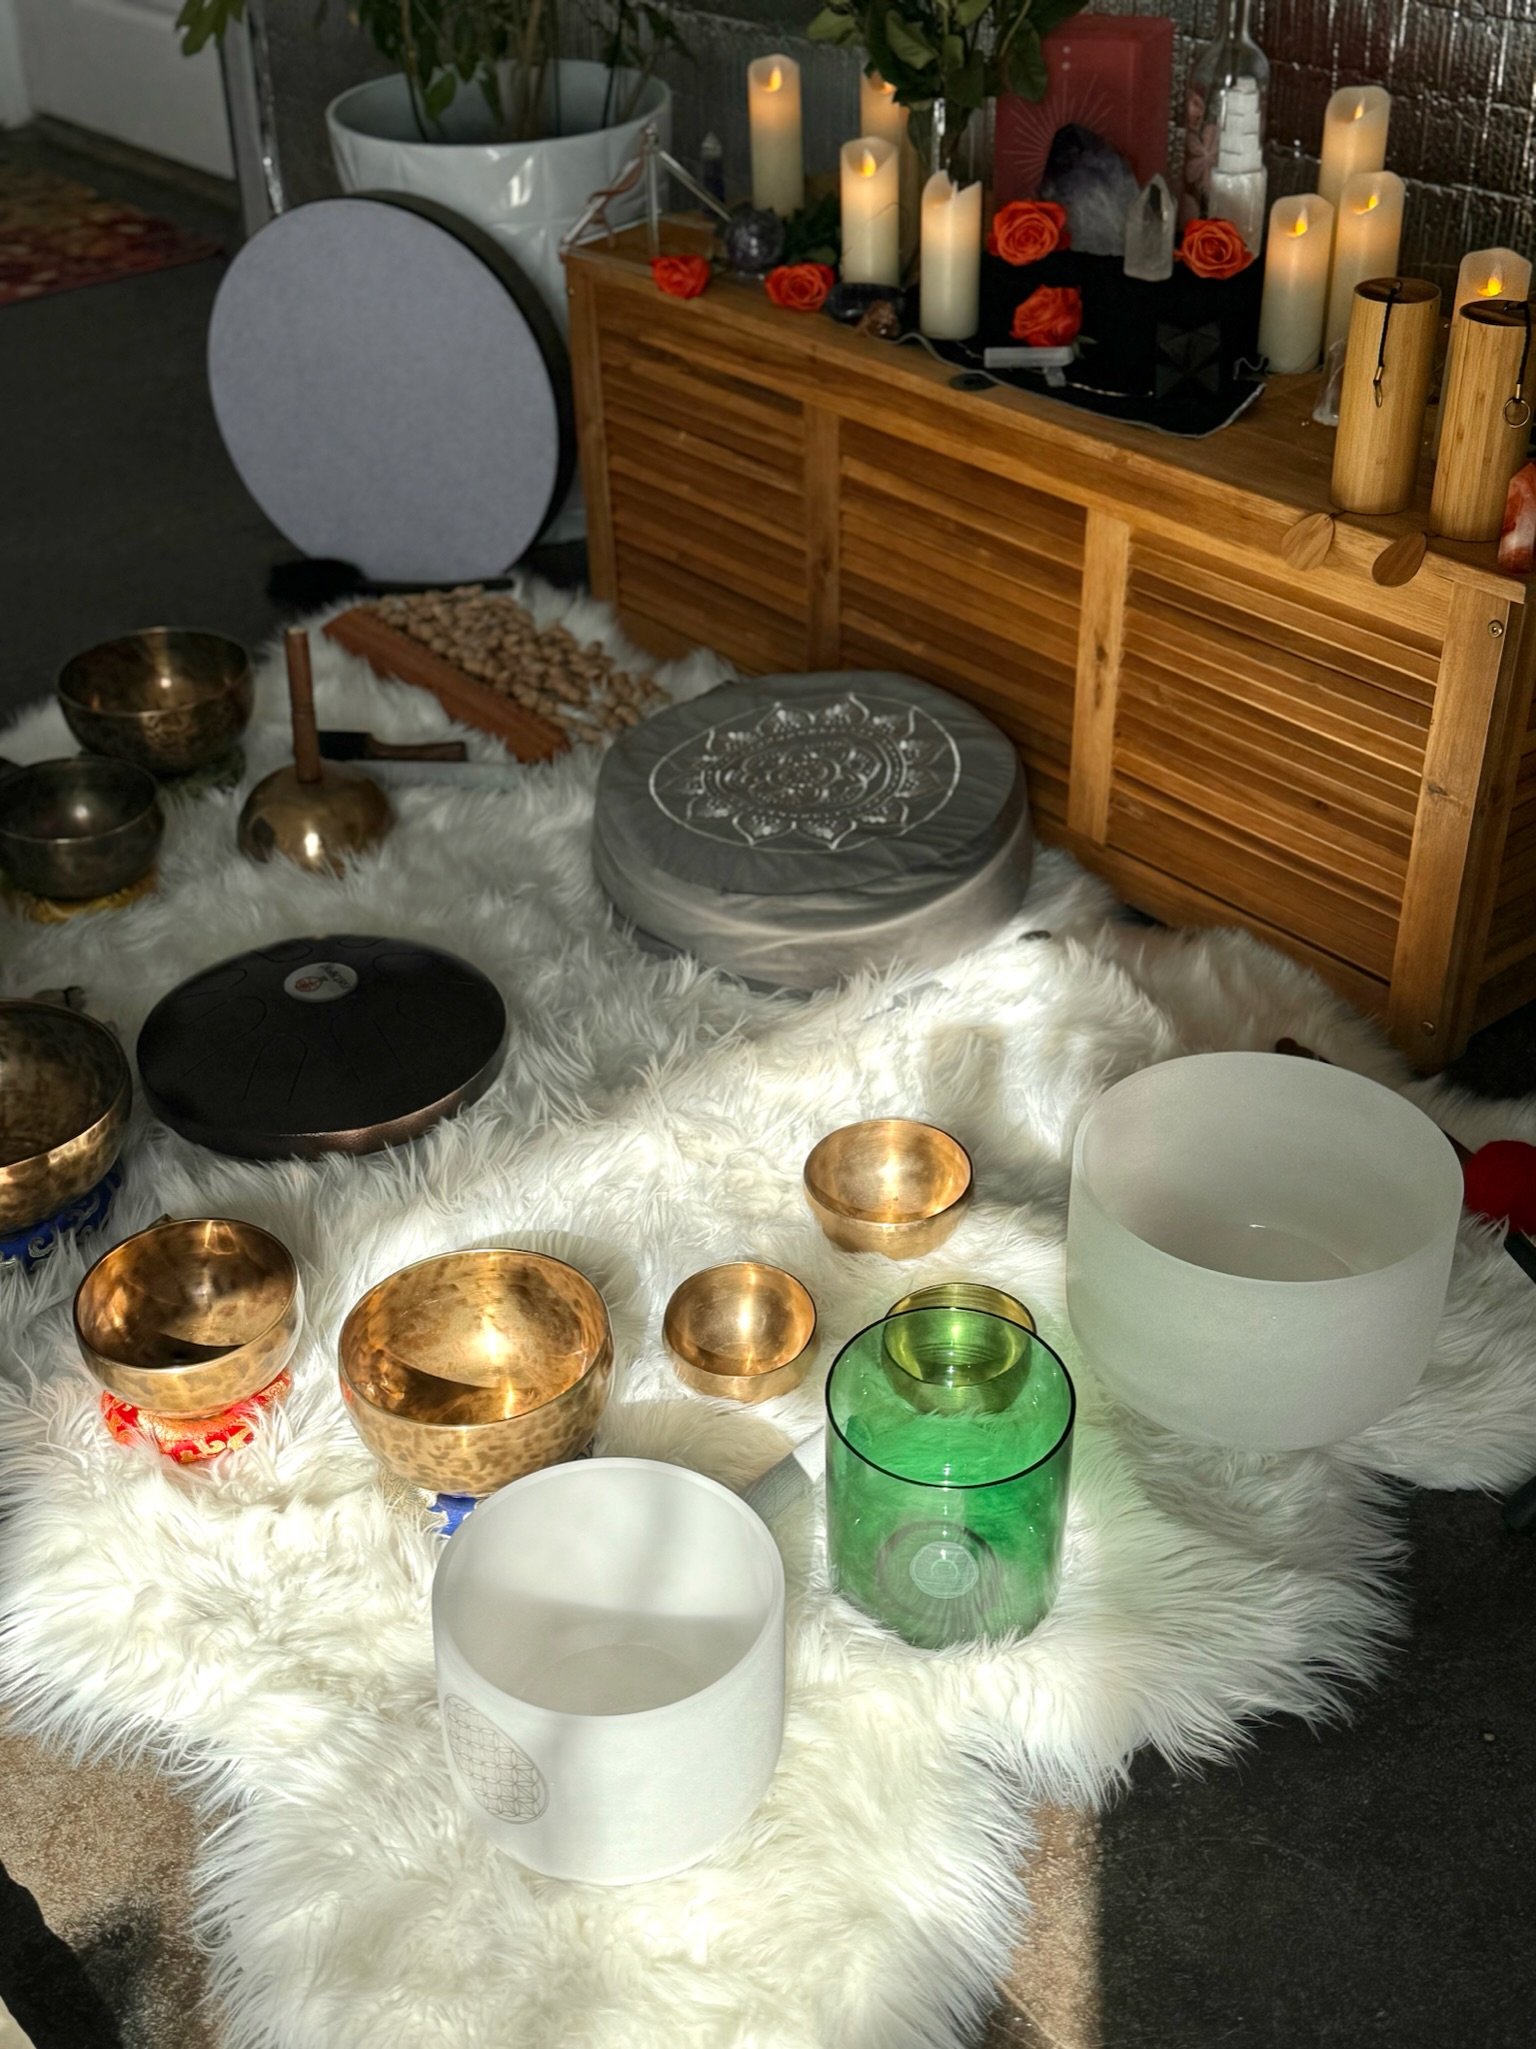 Multiple bowls used for sound meditation on a white furry carpet.